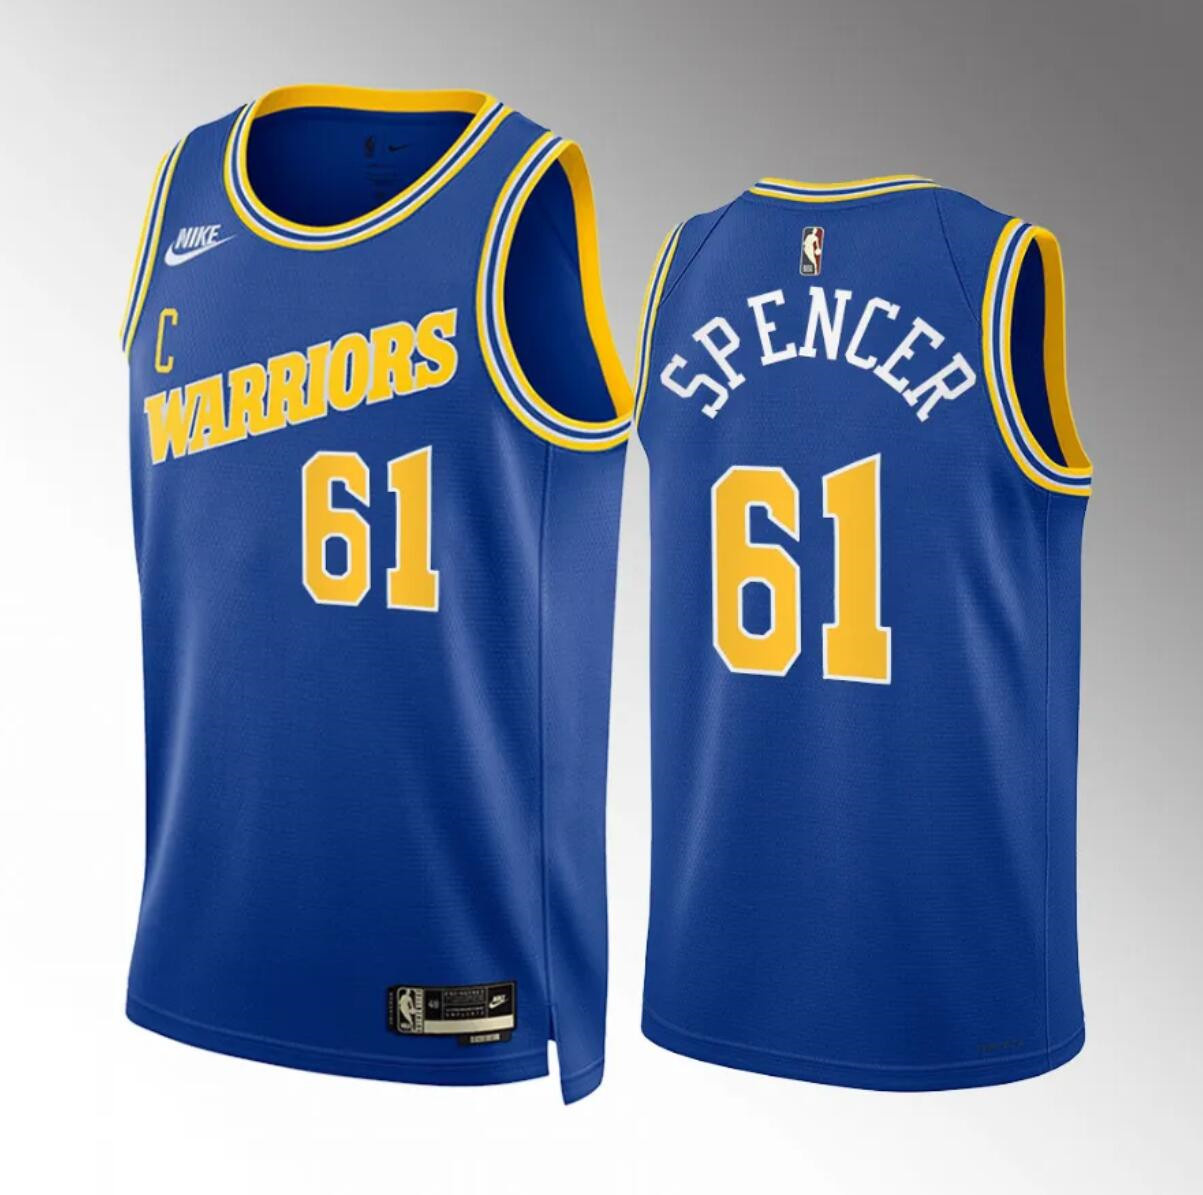 Men's Golden State Warriors #61 Pat Spencer Blue Classic Edition Stitched Basketball Jersey